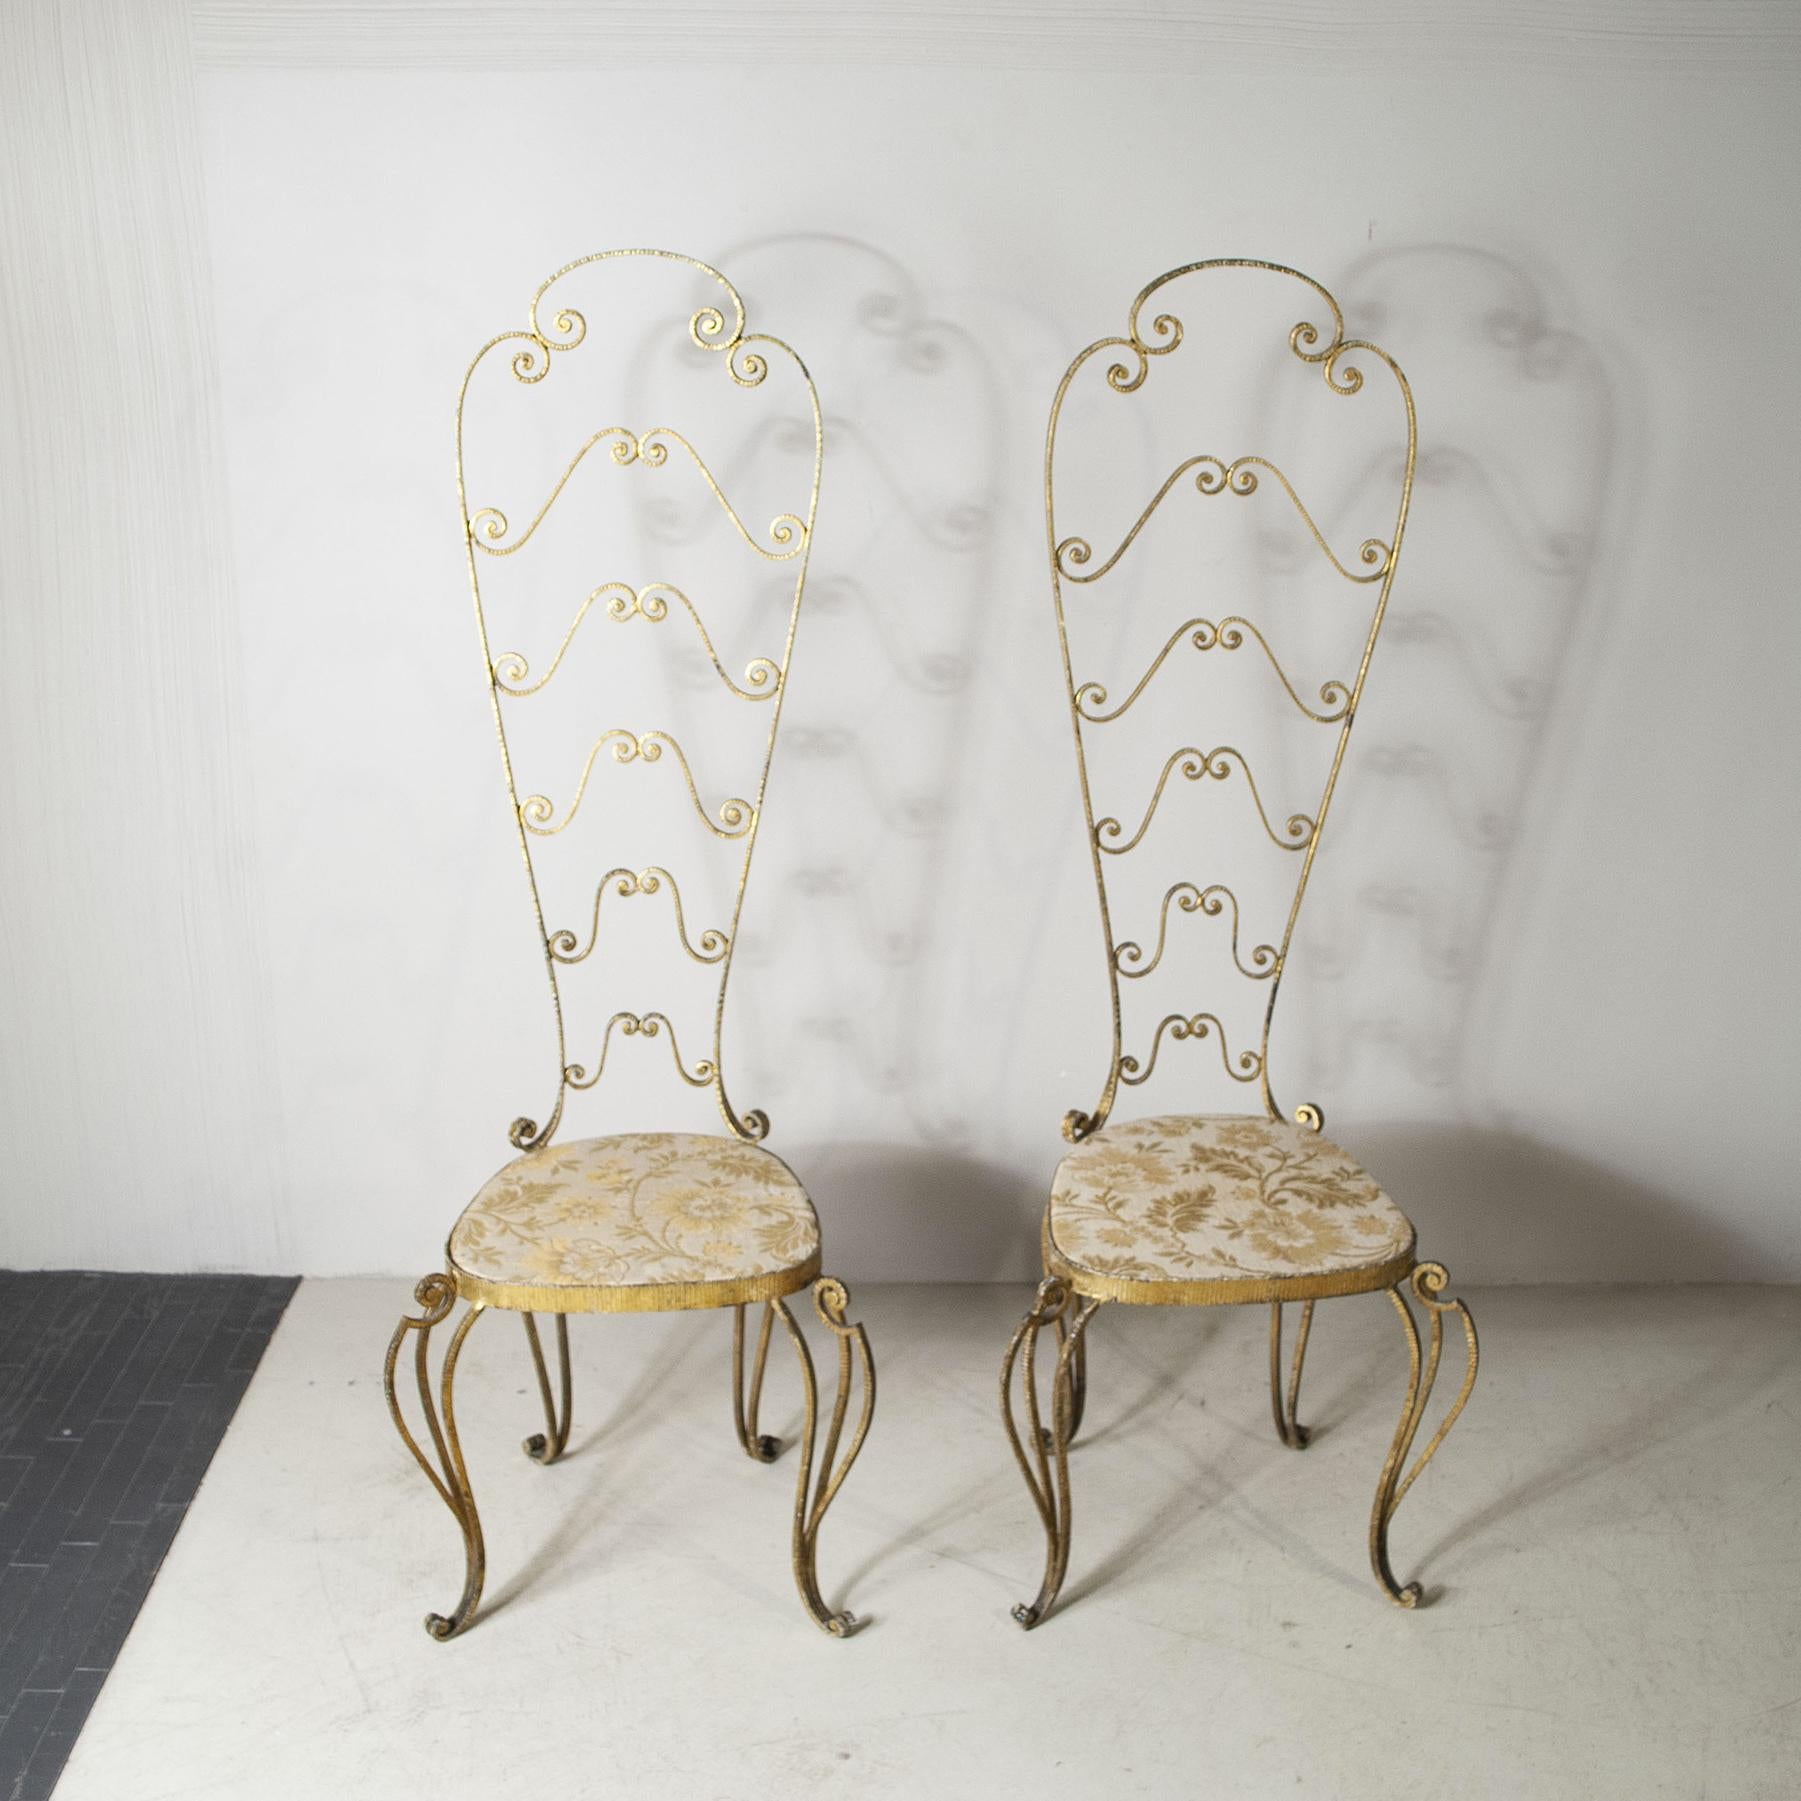 Wrought Iron Pierluigi Colli Set Two in Hammered Gilded Iron For Sale